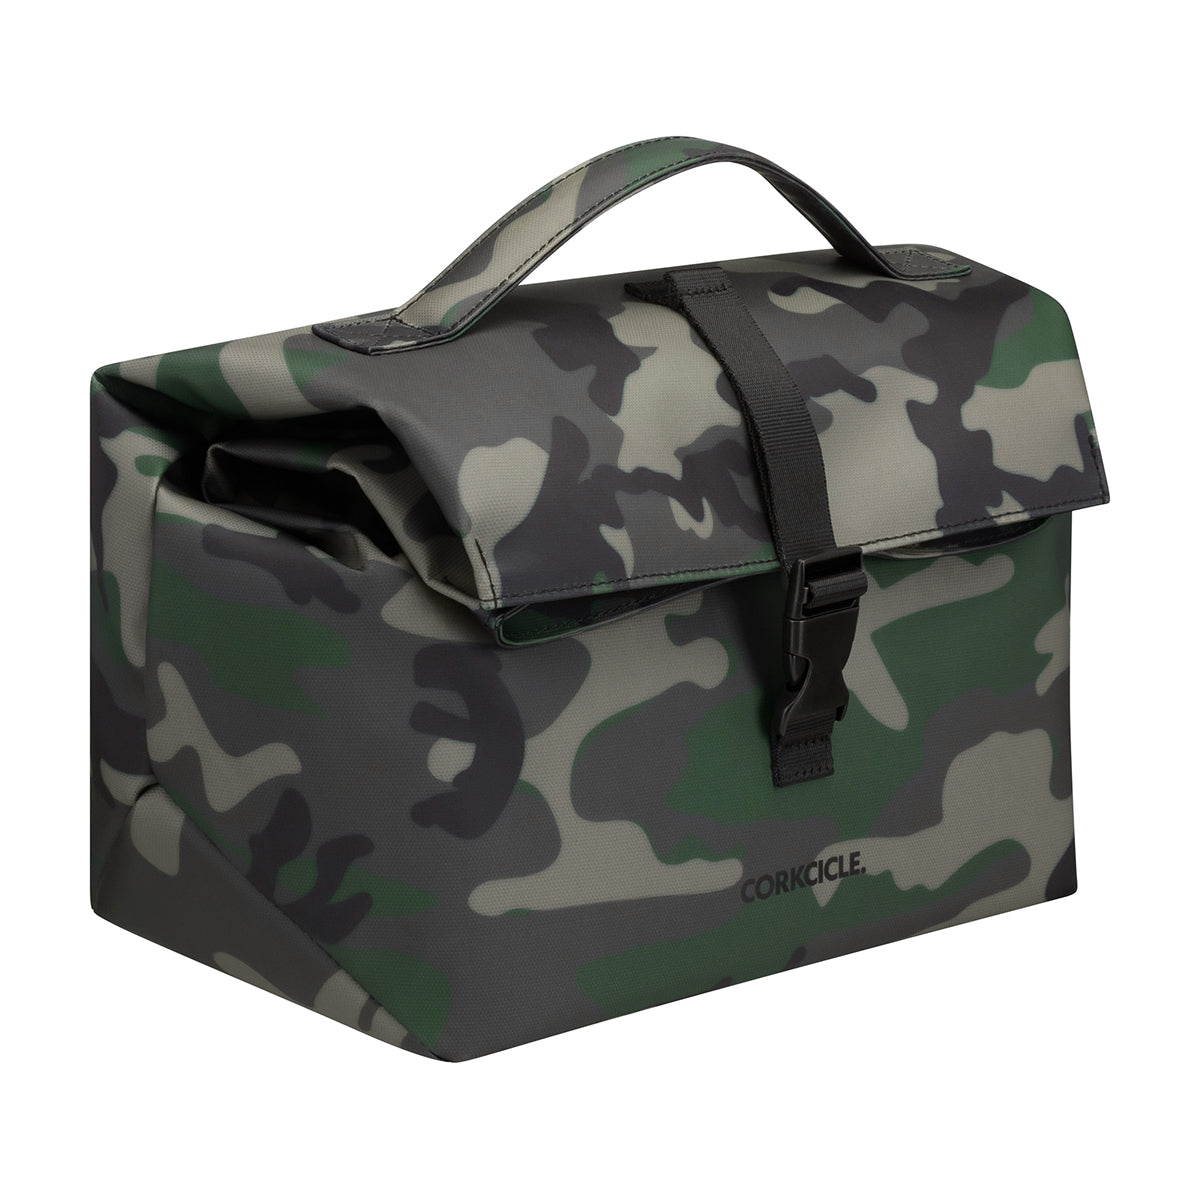 CORKCICLE Cooler Bag Nona Roll-Top - Woodland Camo Lunch Bag **CLEARANCE**